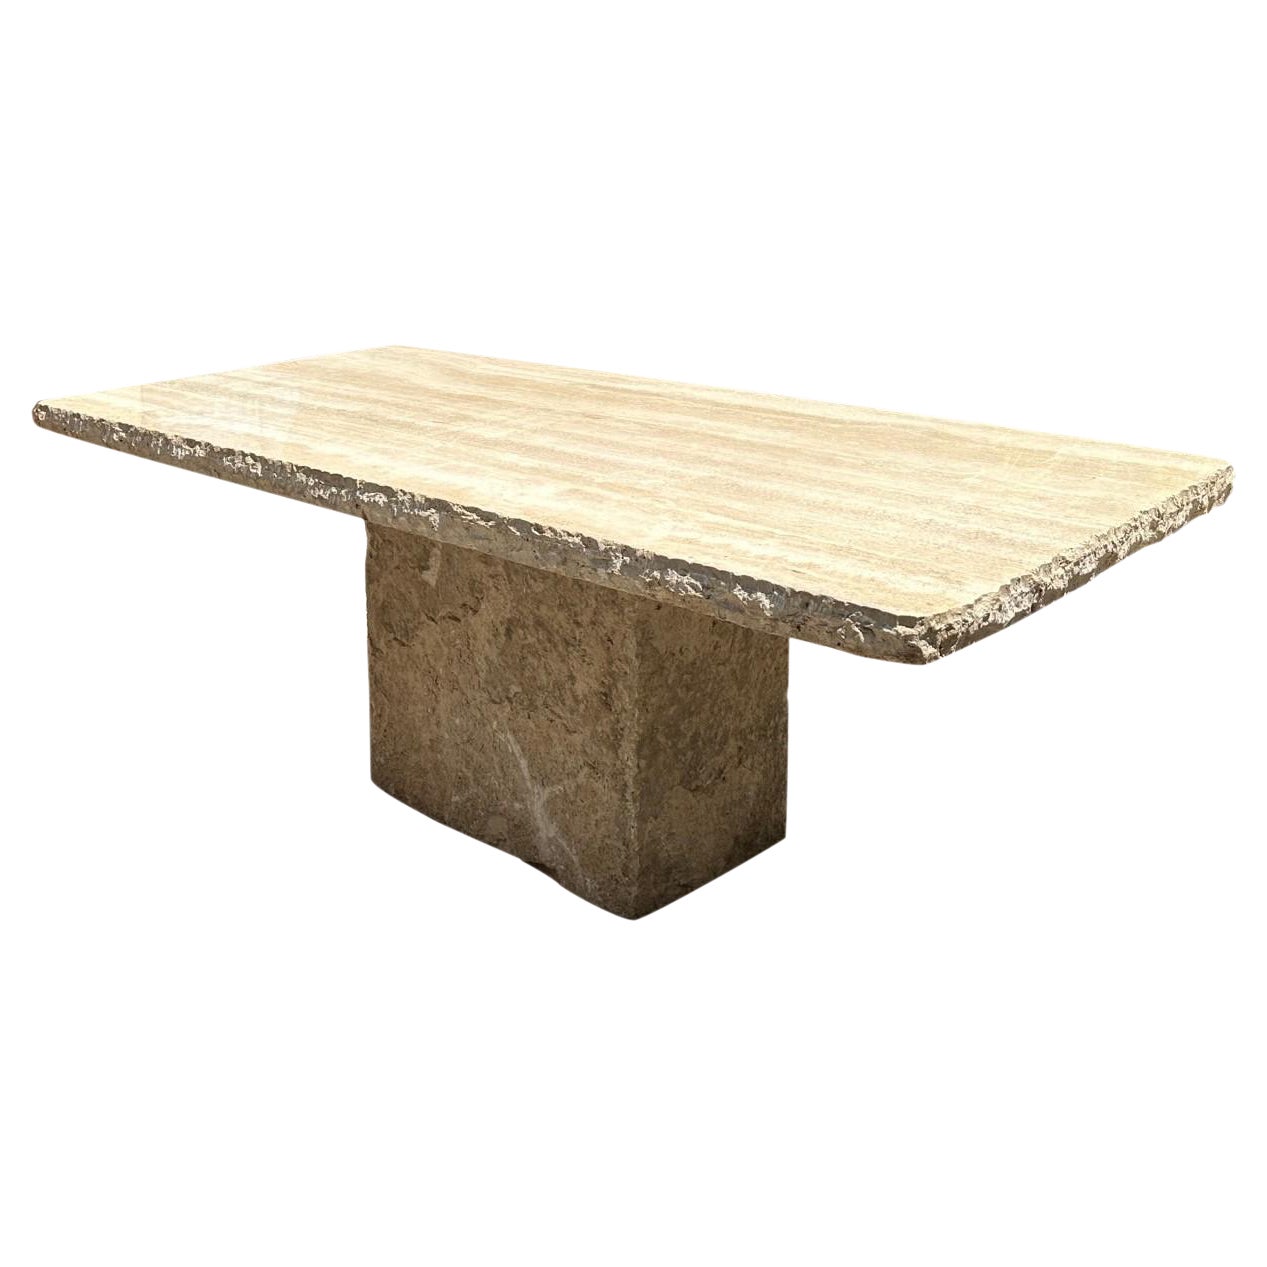 Large Reconstituted Stone Garden Outdoor Indoor dining Table Farm Rustic Antique For Sale